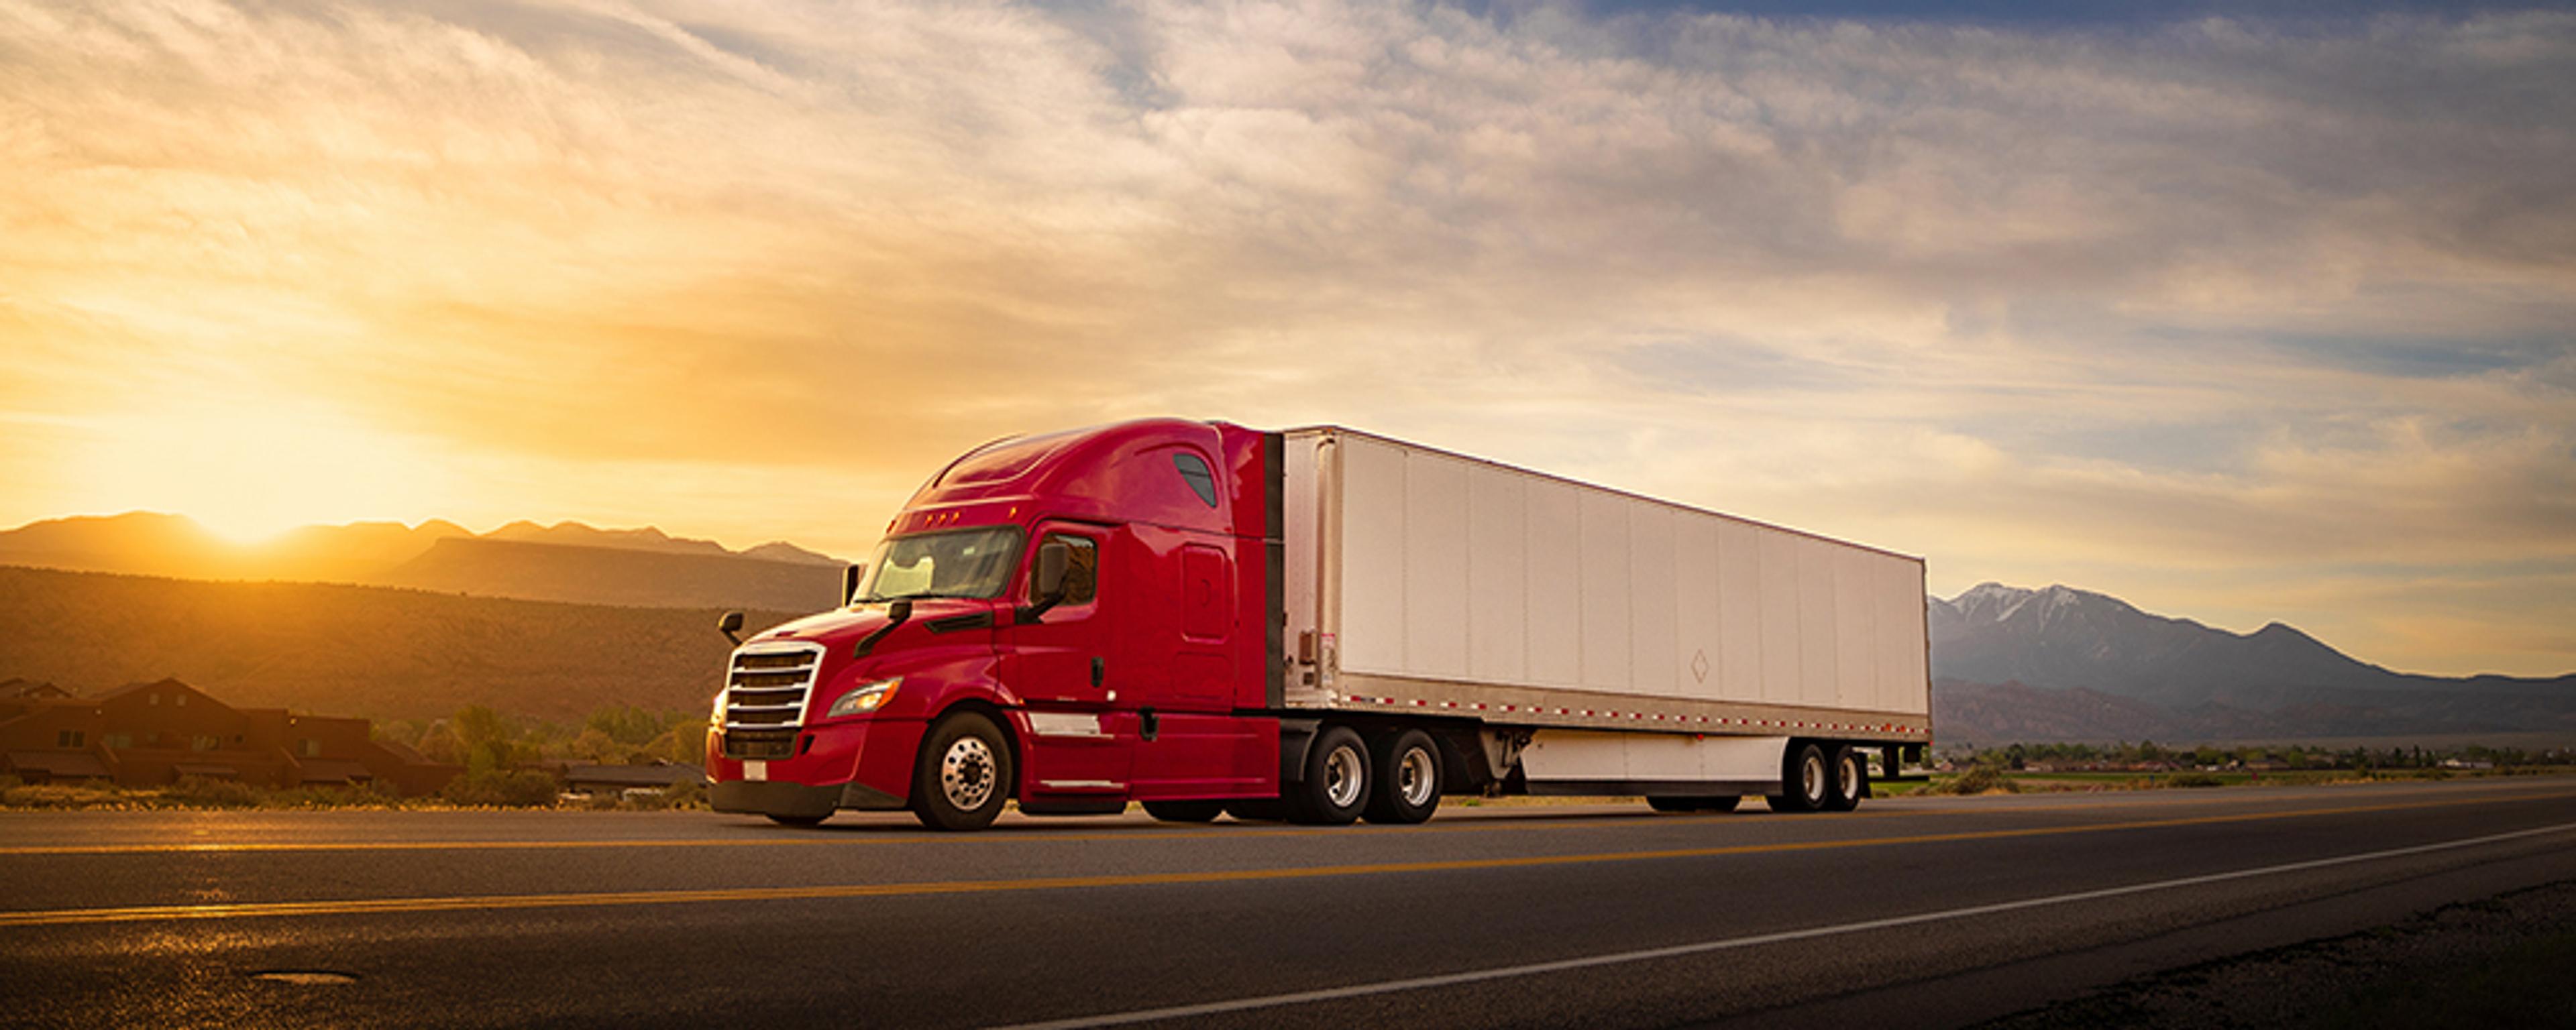 Why Congress Should Enact a Mileage-Based User Fee for Heavy Trucking